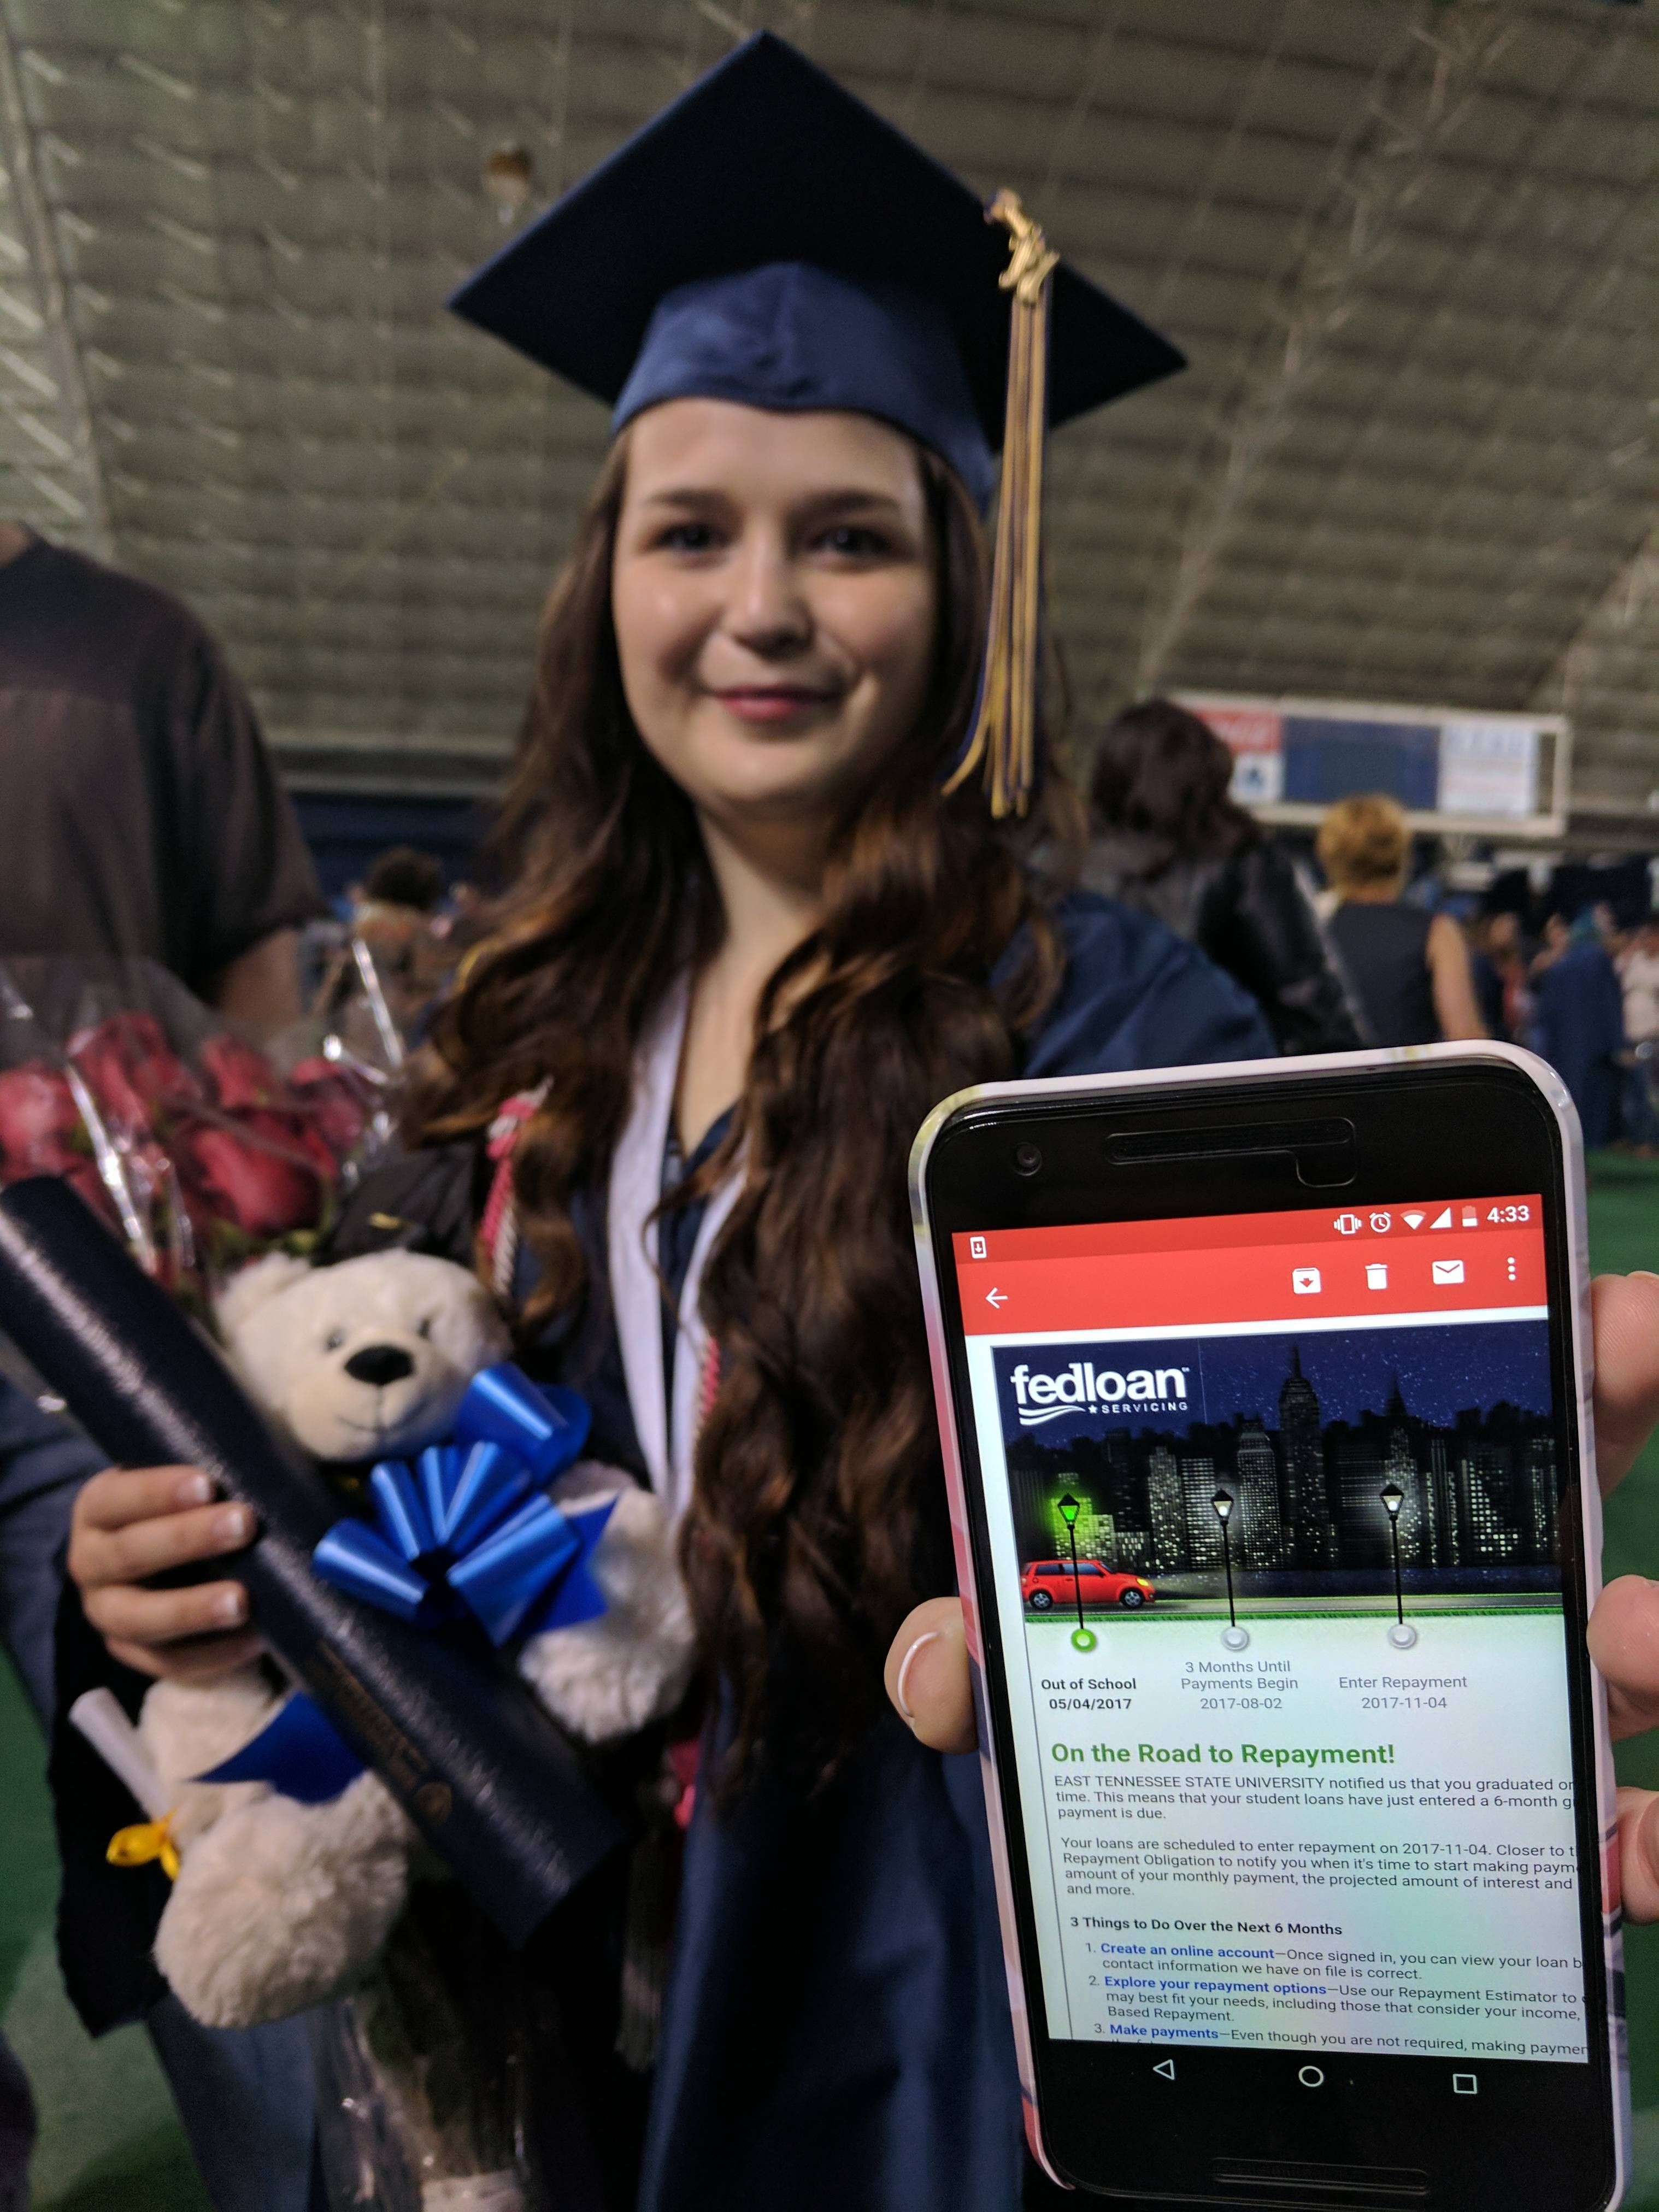 Fiancée got her Student Loan repayment email...while attending her college graduation.